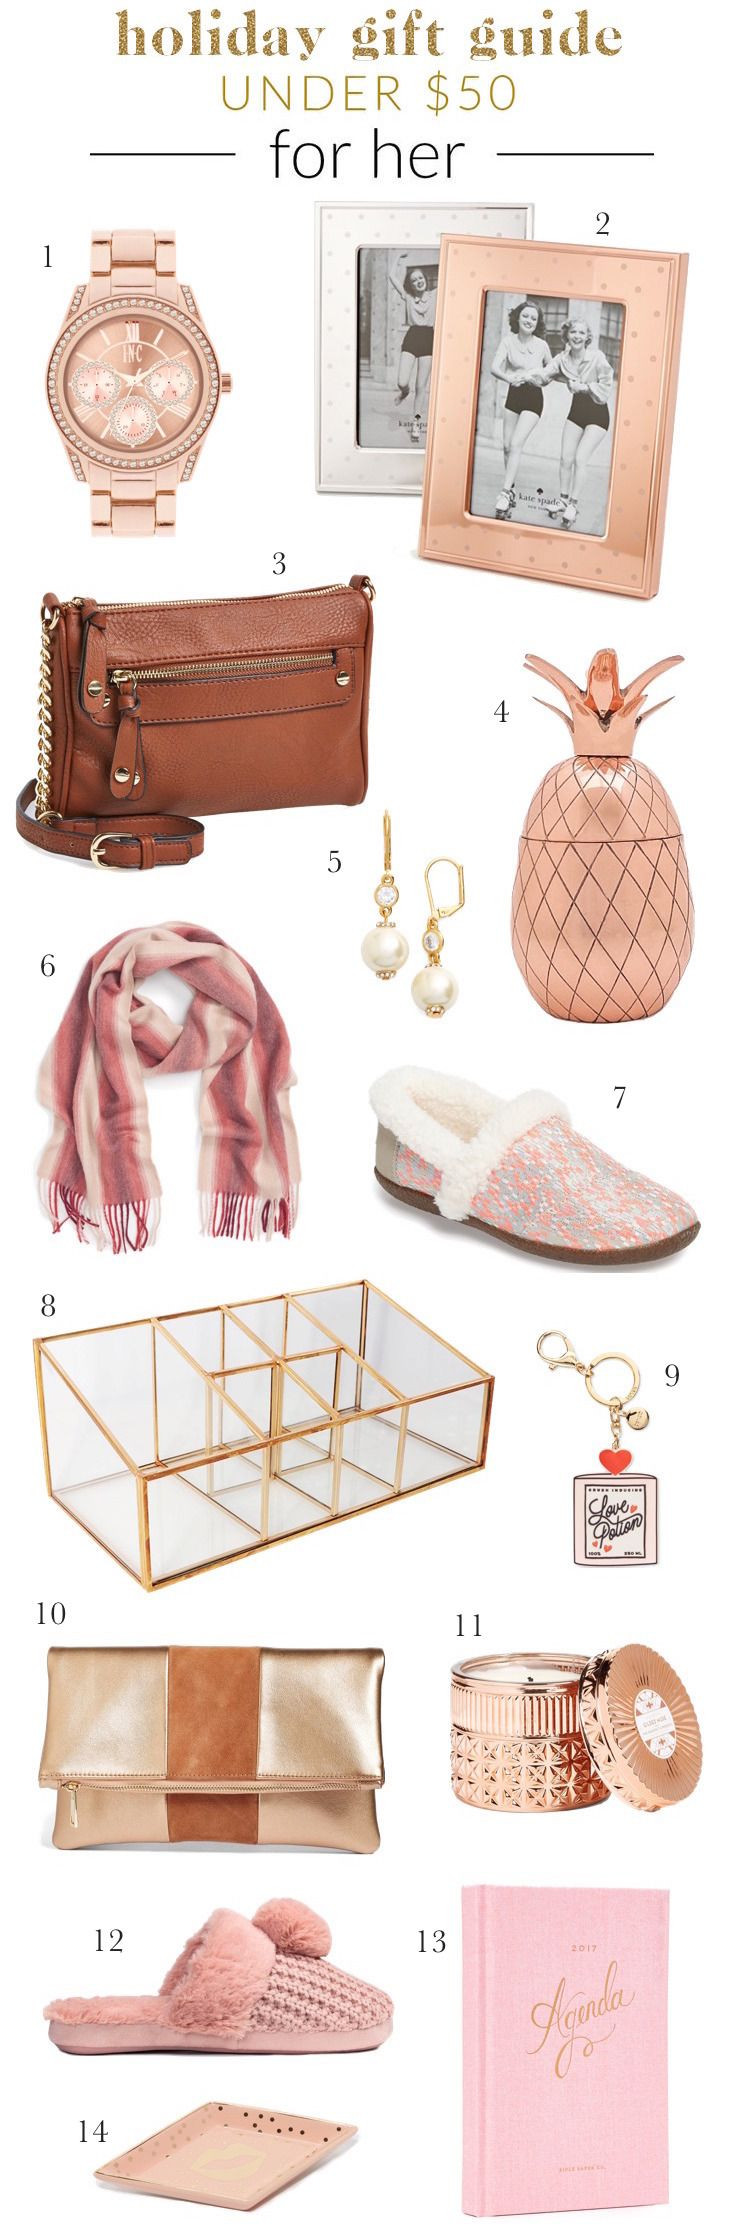 Girlfriend Gift Ideas Under $50
 Glam Gifts For Your Gal Pal Under $50